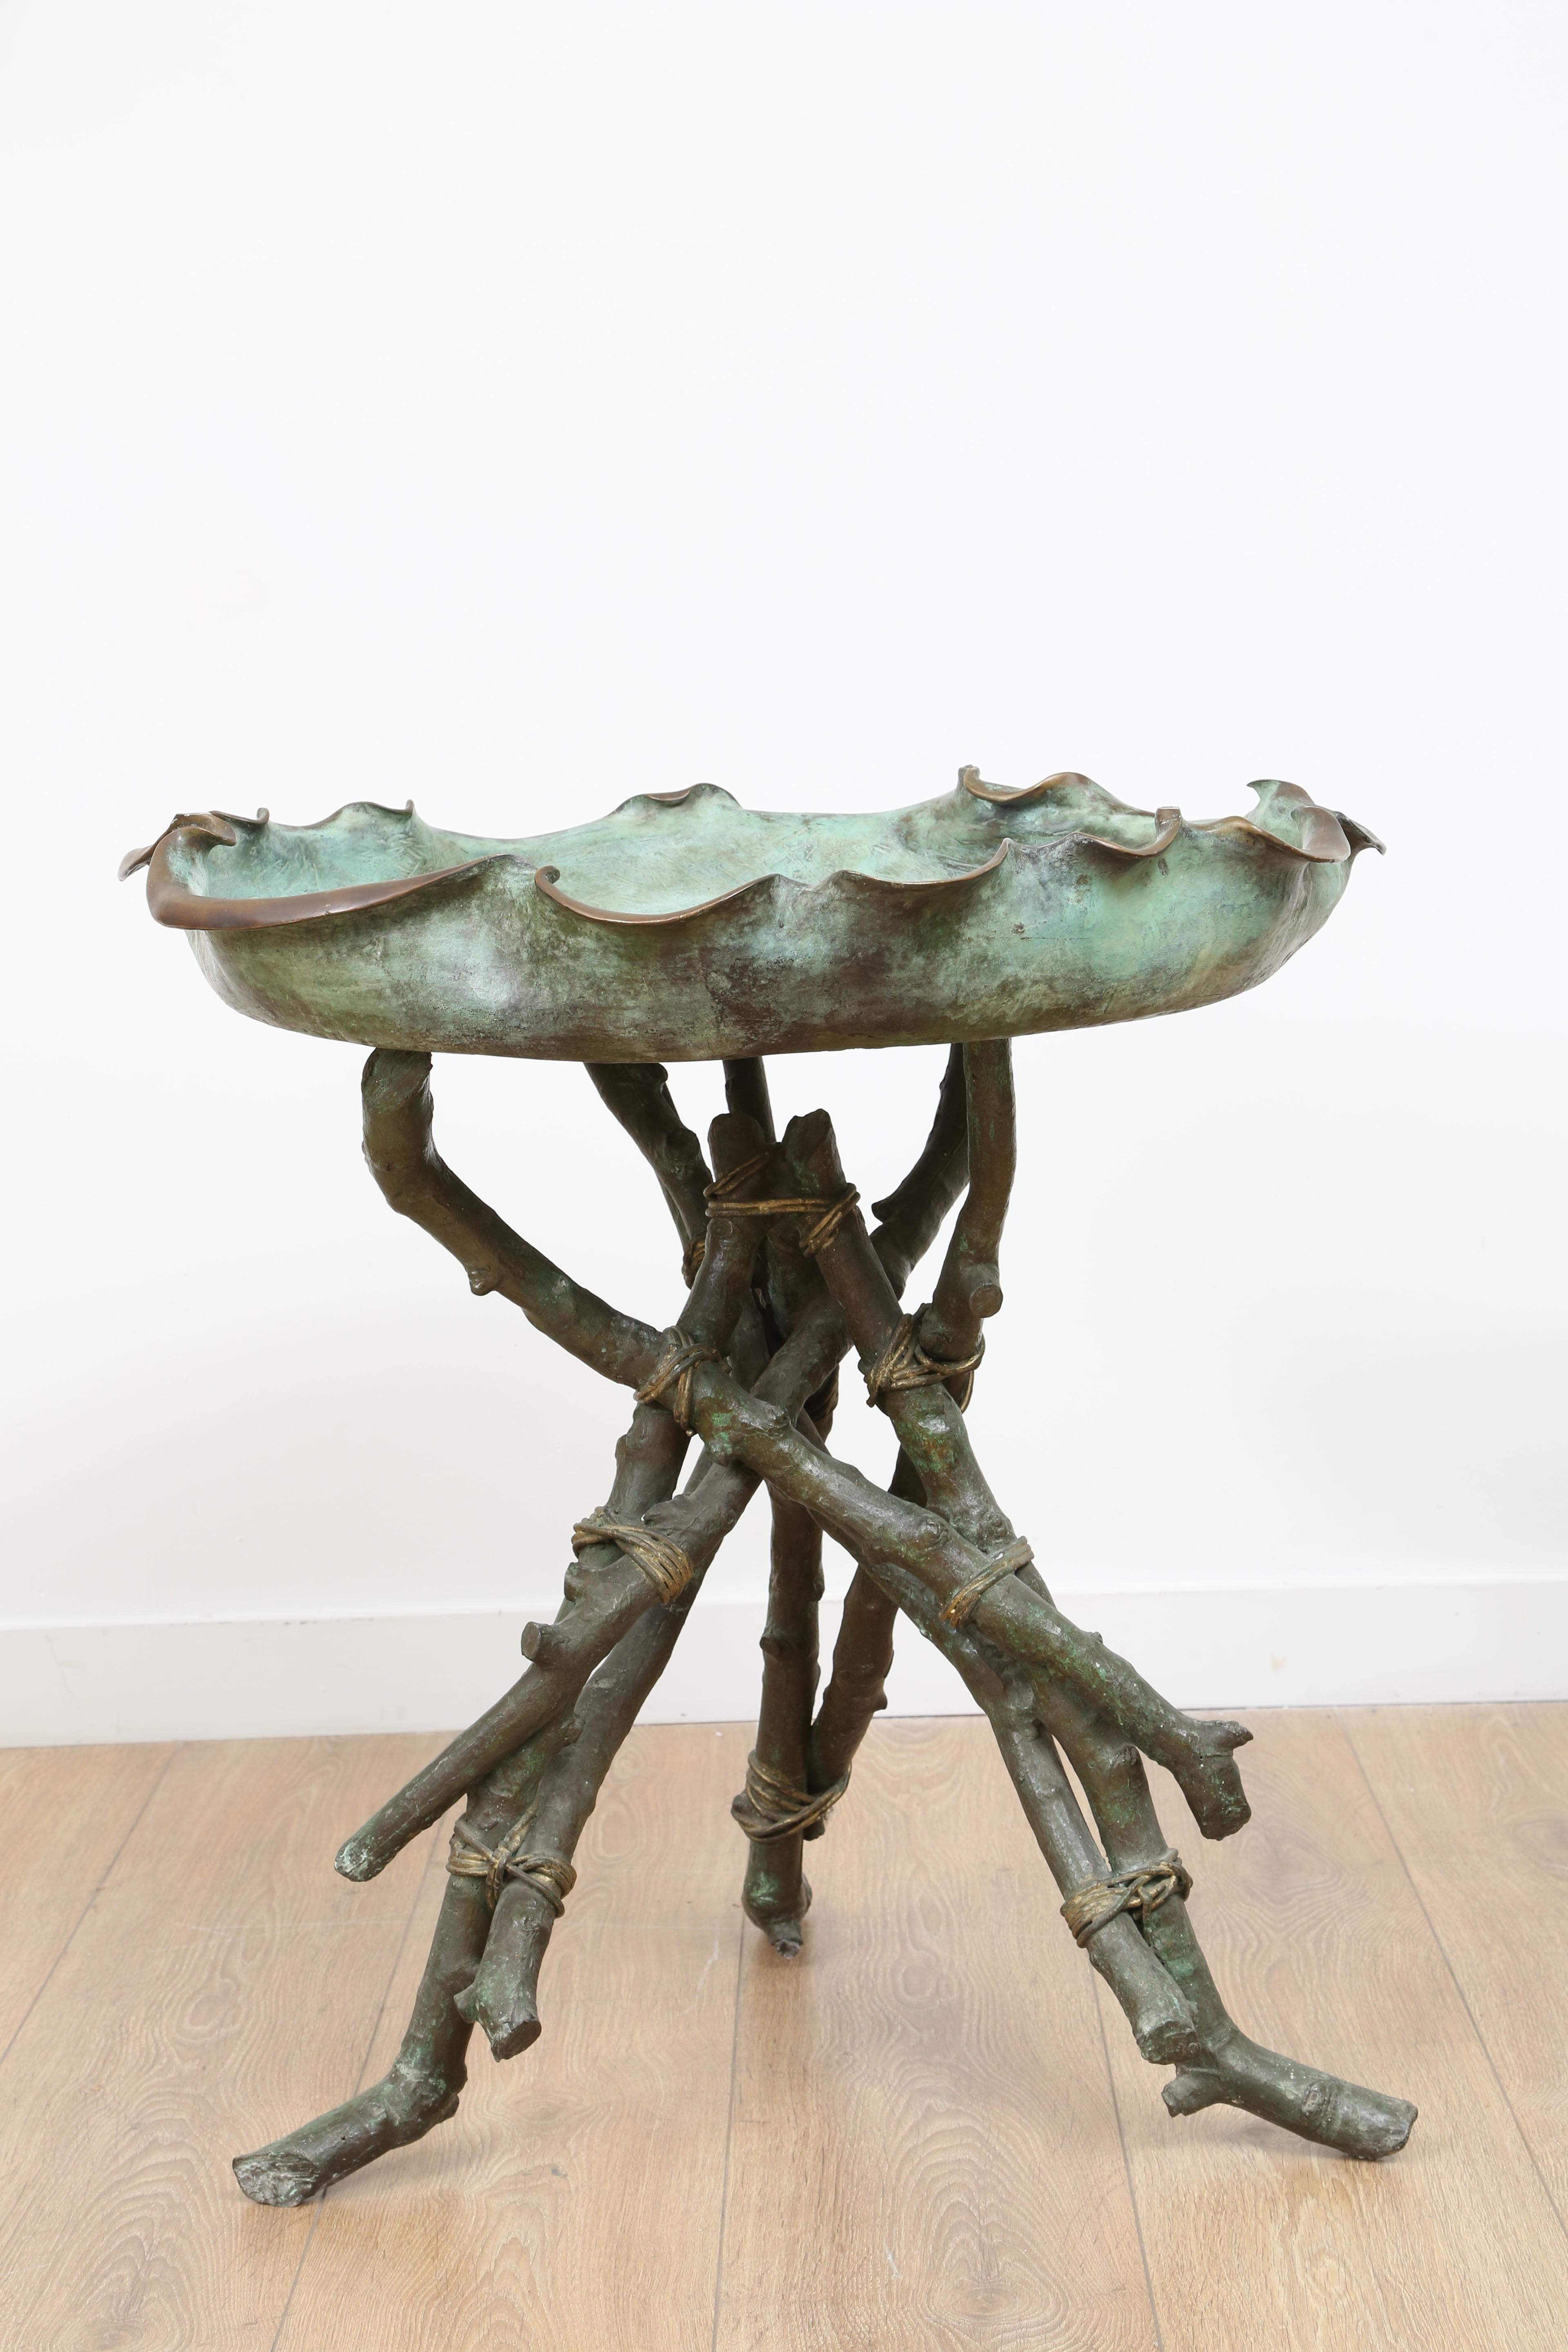 Italian grand tour bronze bird bath or center table

Rare Italian late 19th century, naturalistic bird bath or can also be used as a center table with a glass top. Bronze tripod base with twigs supporting an organic shaped basin. Craftsmanship is